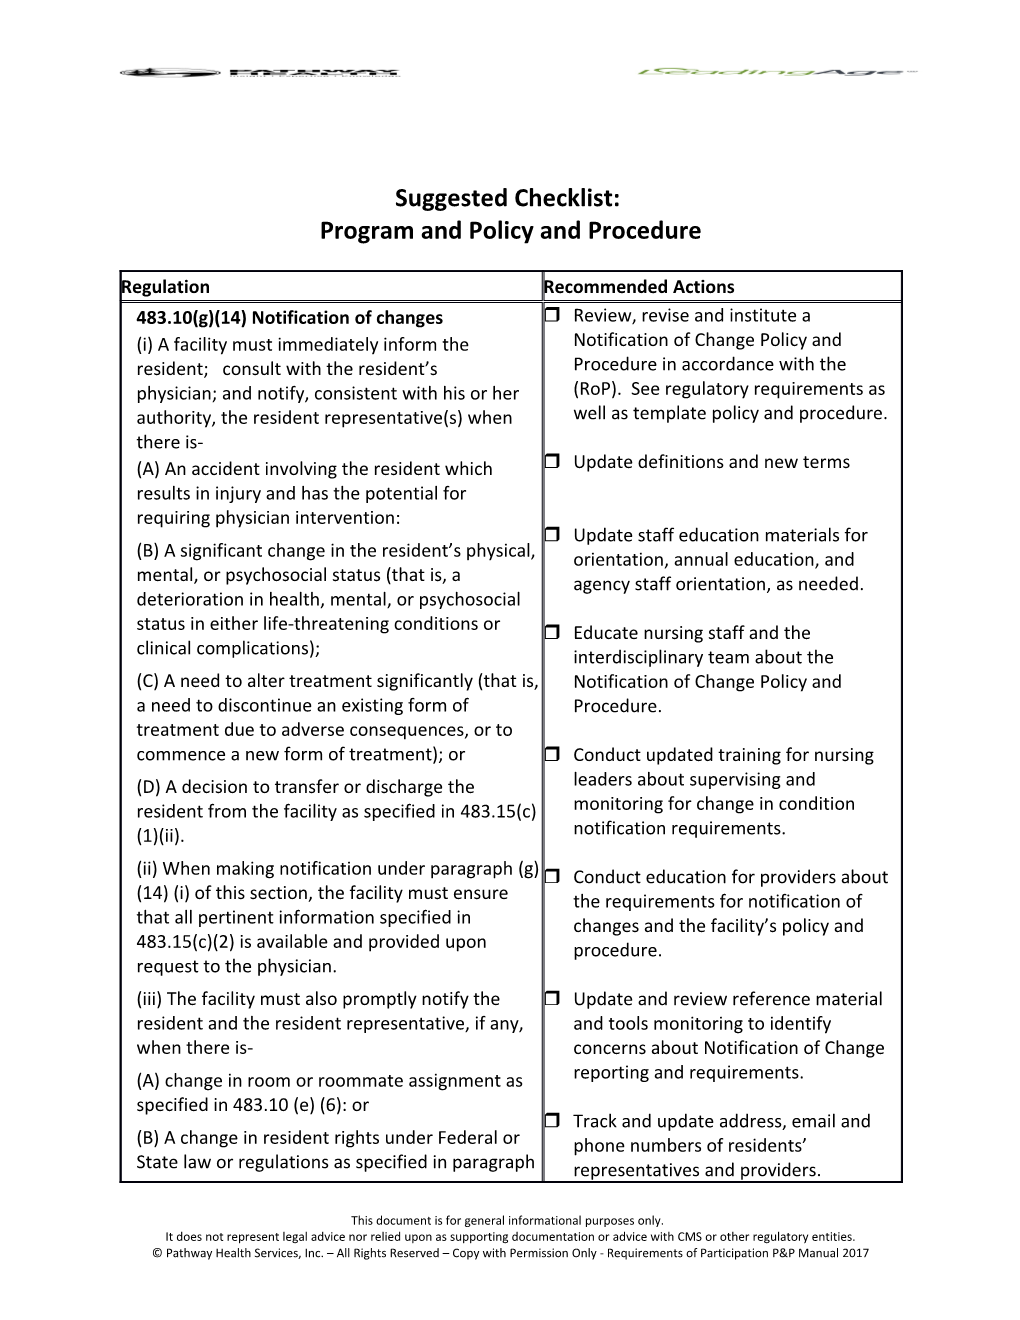 Tool:Notification of Changes Policy and Procedurechecklist